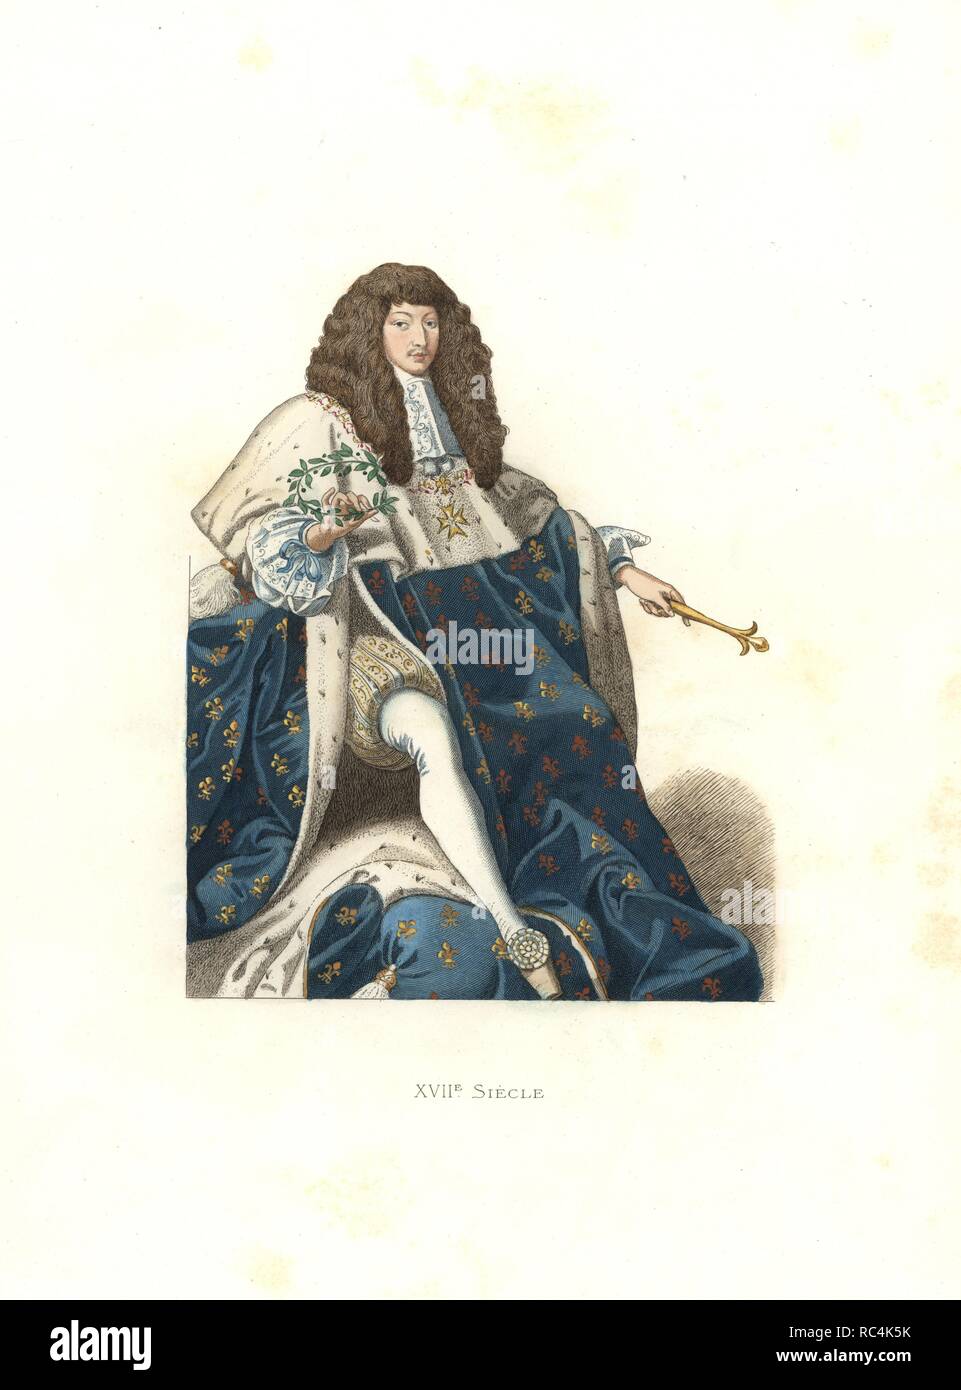 Young Louis XIV, King of France, 17th century, from a painting in the Musee de Blois. Handcolored illustration by E. Lechevallier-Chevignard, lithographed by A. Didier, L. Flameng, F. Laguillermie, from Georges Duplessis's 'Costumes historiques des XVIe, XVIIe et XVIIIe siecles' (Historical costumes of the 16th, 17th and 18th centuries), Paris 1867. The book was a continuation of the series on the costumes of the 12th to 15th centuries published by Camille Bonnard and Paul Mercuri from 1830. Georges Duplessis (1834-1899) was curator of the Prints department at the Bibliotheque nationale. Edmon Stock Photo